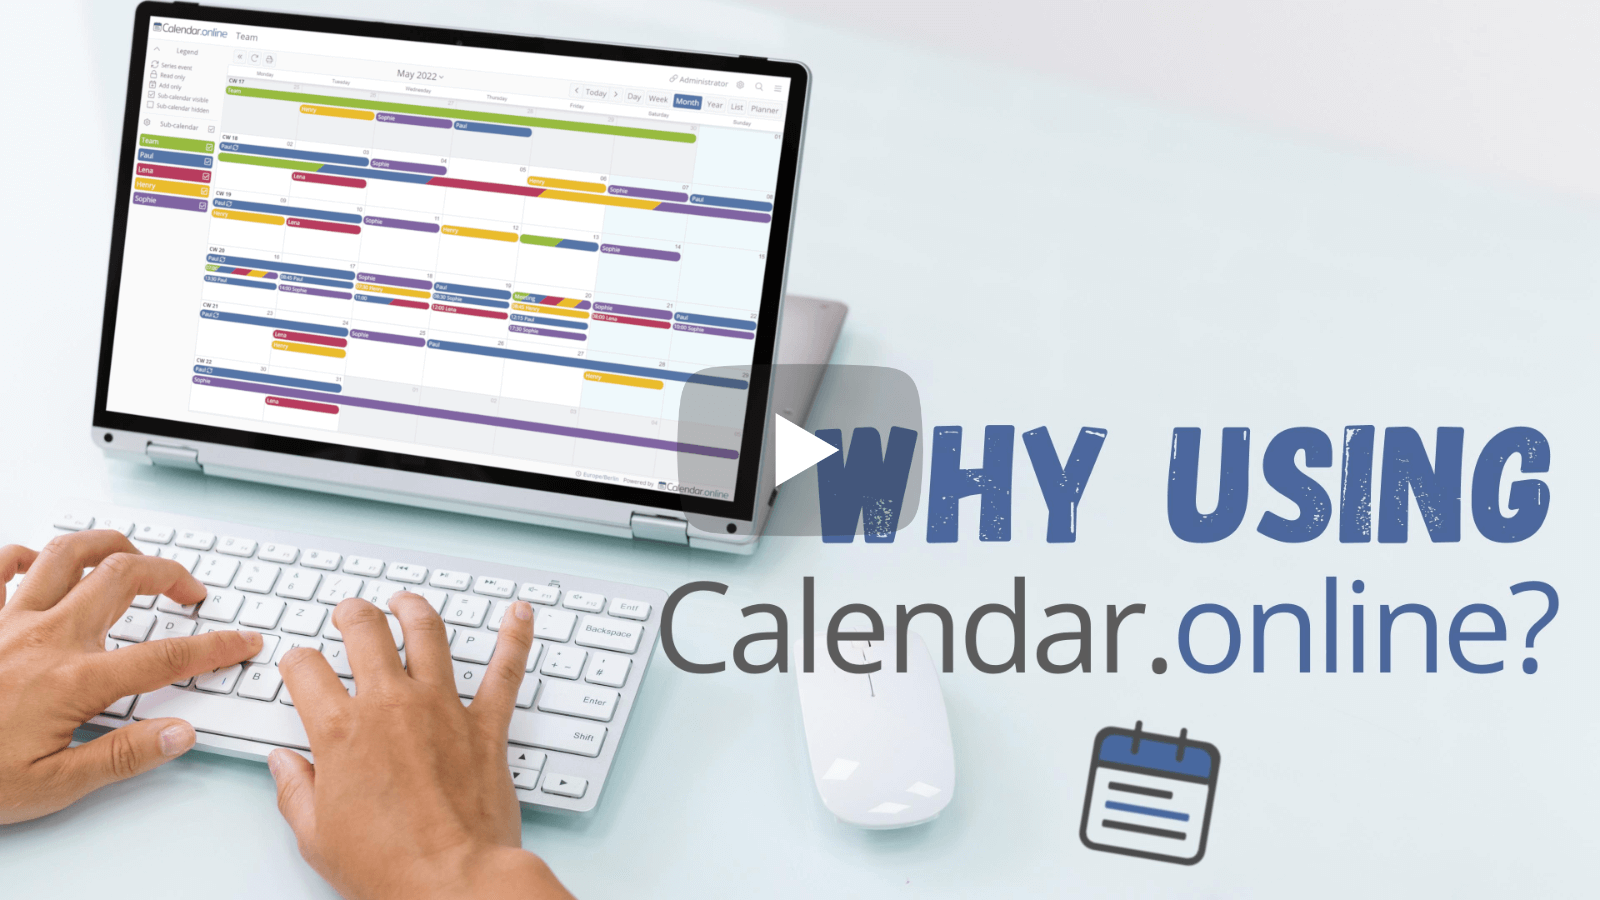 Video: What can Calendar Online do for you?